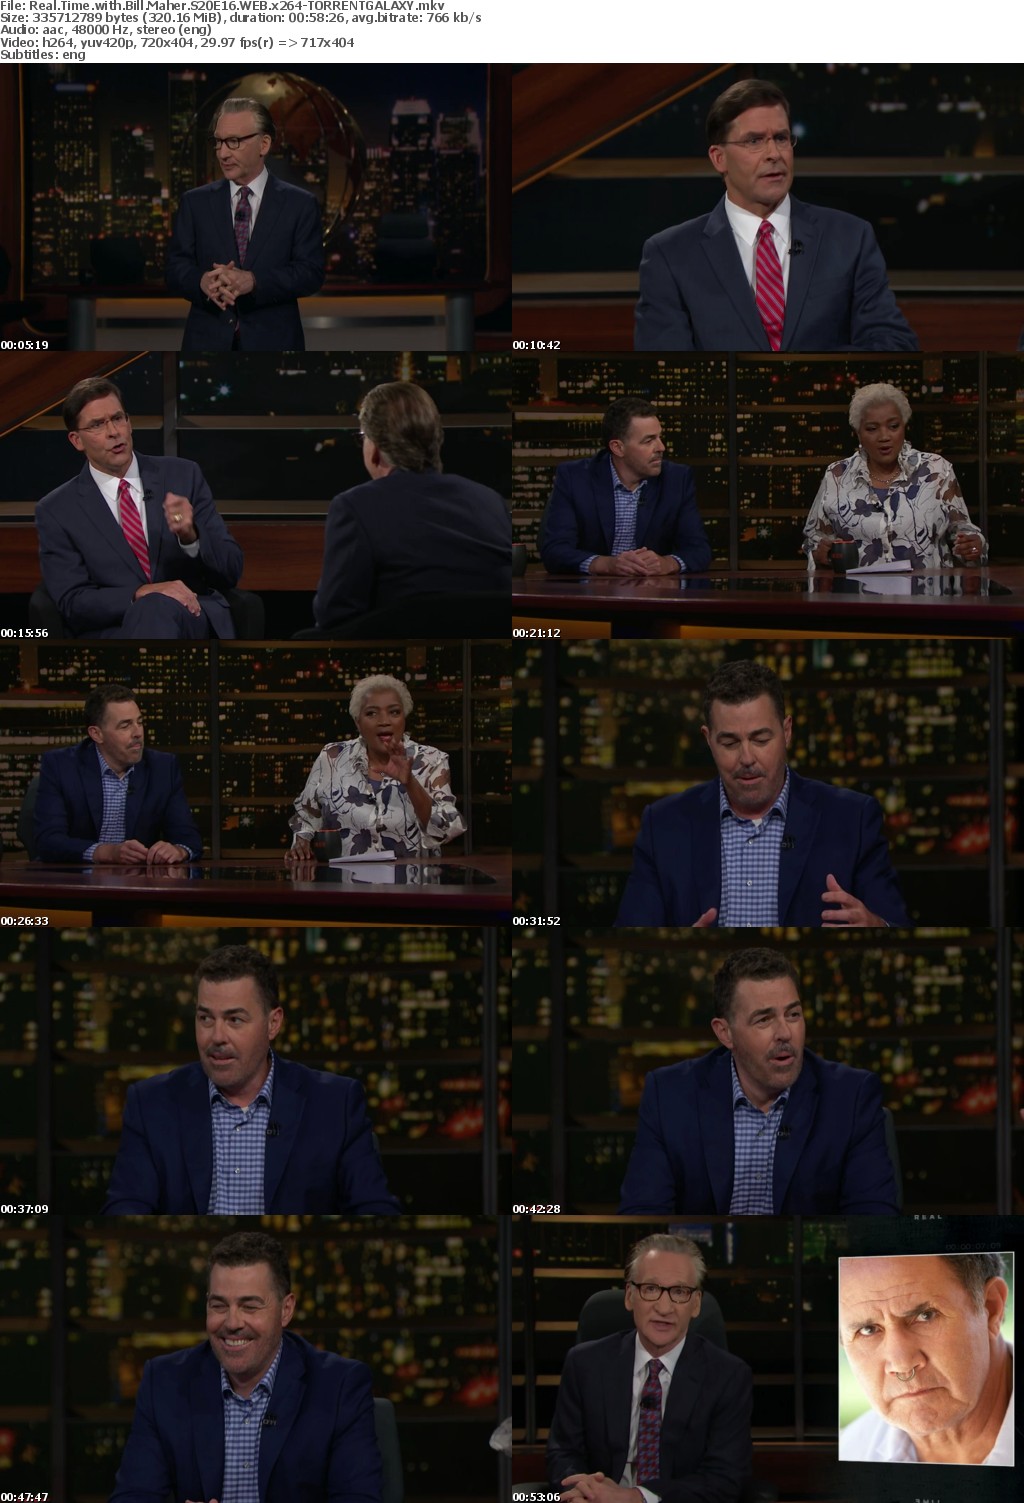 Real Time with Bill Maher S20E16 WEB x264-GALAXY